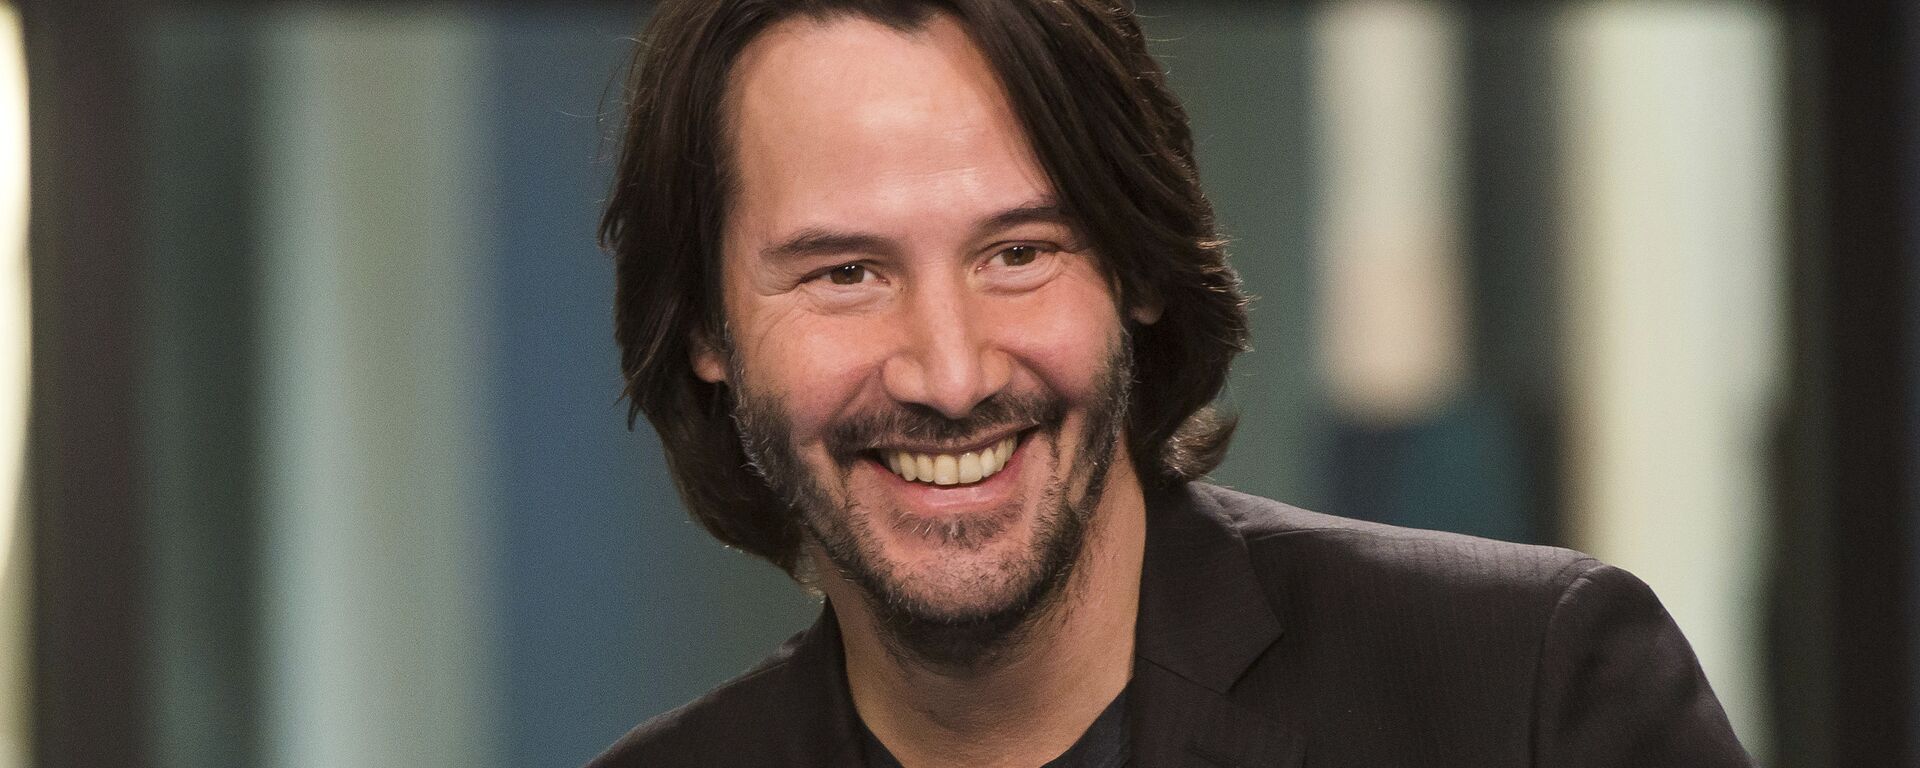 Keanu Reeves participates in the BUILD Speaker Series to discuss John Wick: Chapter 2 at AOL Studios on Thursday, Feb. 2, 2017, in New York - Sputnik International, 1920, 23.06.2020